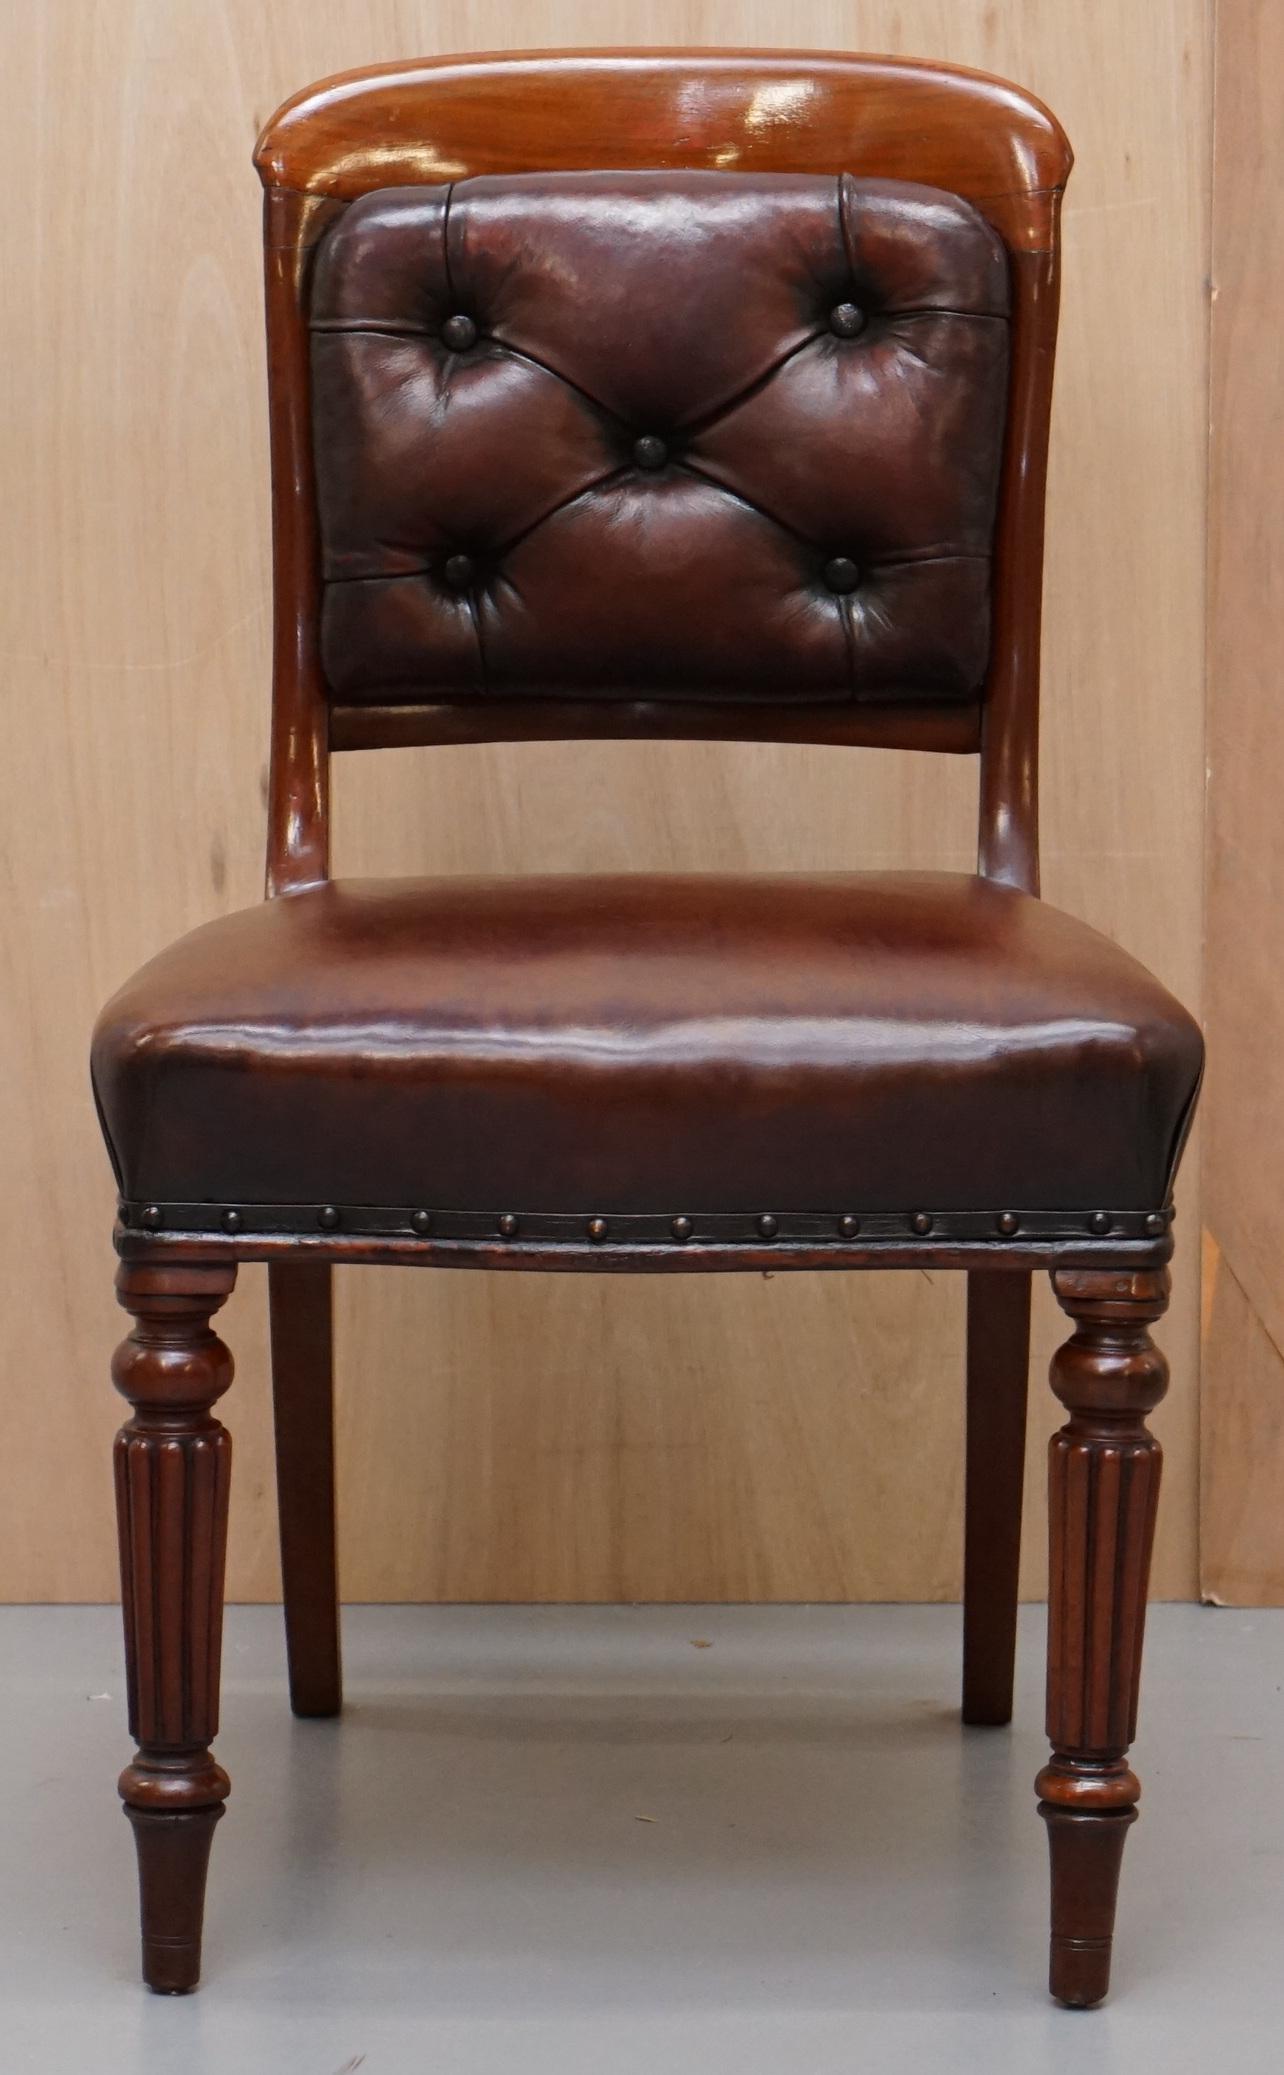 We are delighted to offer for sale this very rare Gillows of Lancaster Regency Mahogany fully restored aged brown leather chair

I have a set of 10 of these listed under my other items 

A very good looking and well made piece, you can find this